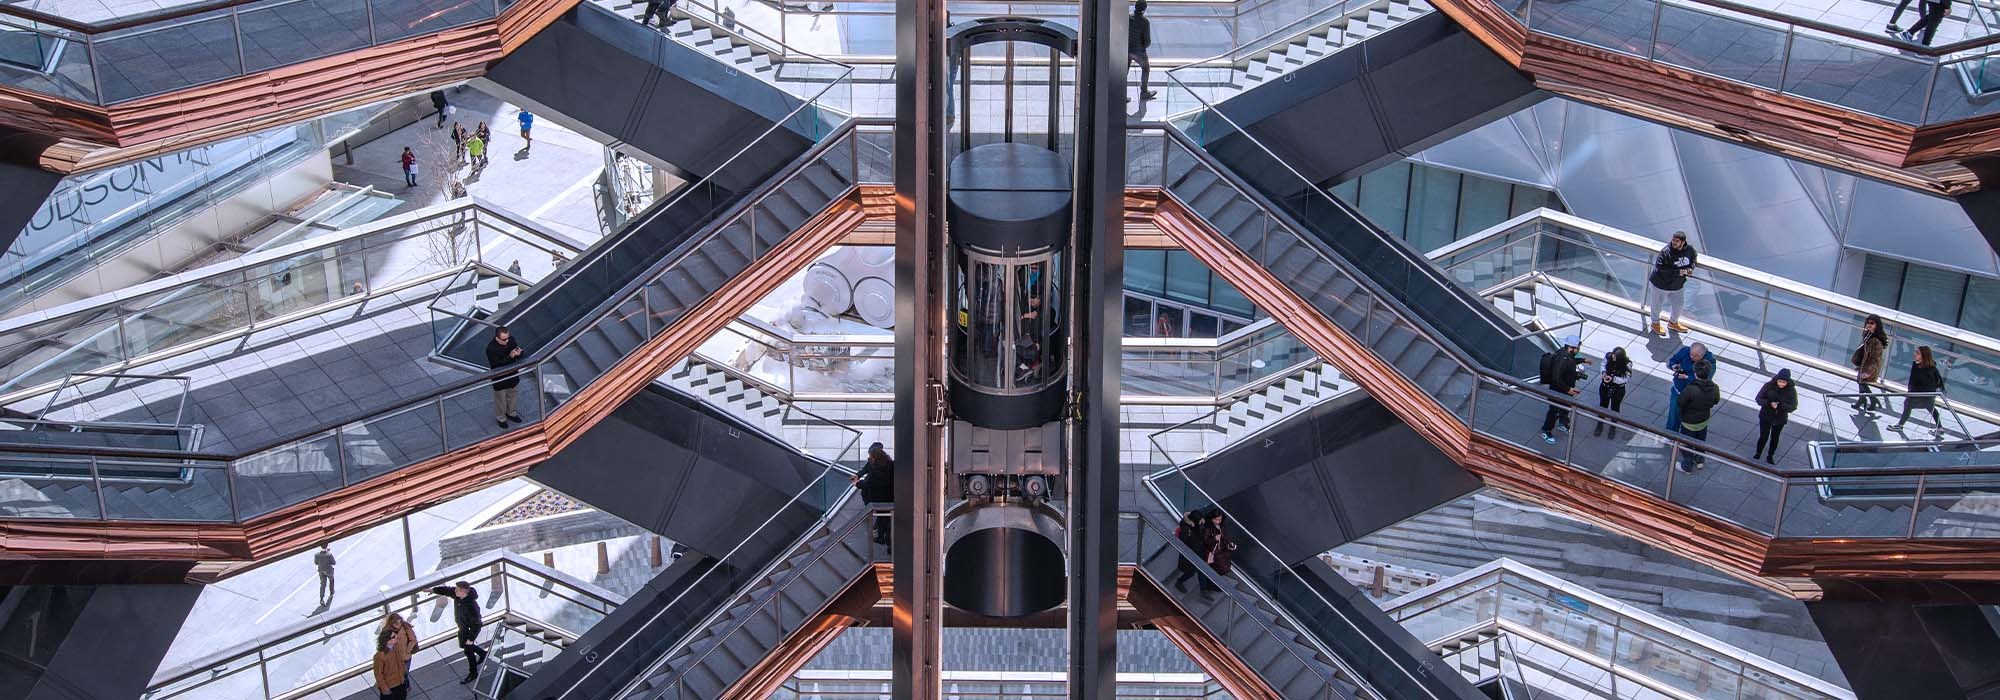 The elevator in the Vessel at Hudson Yards New York City